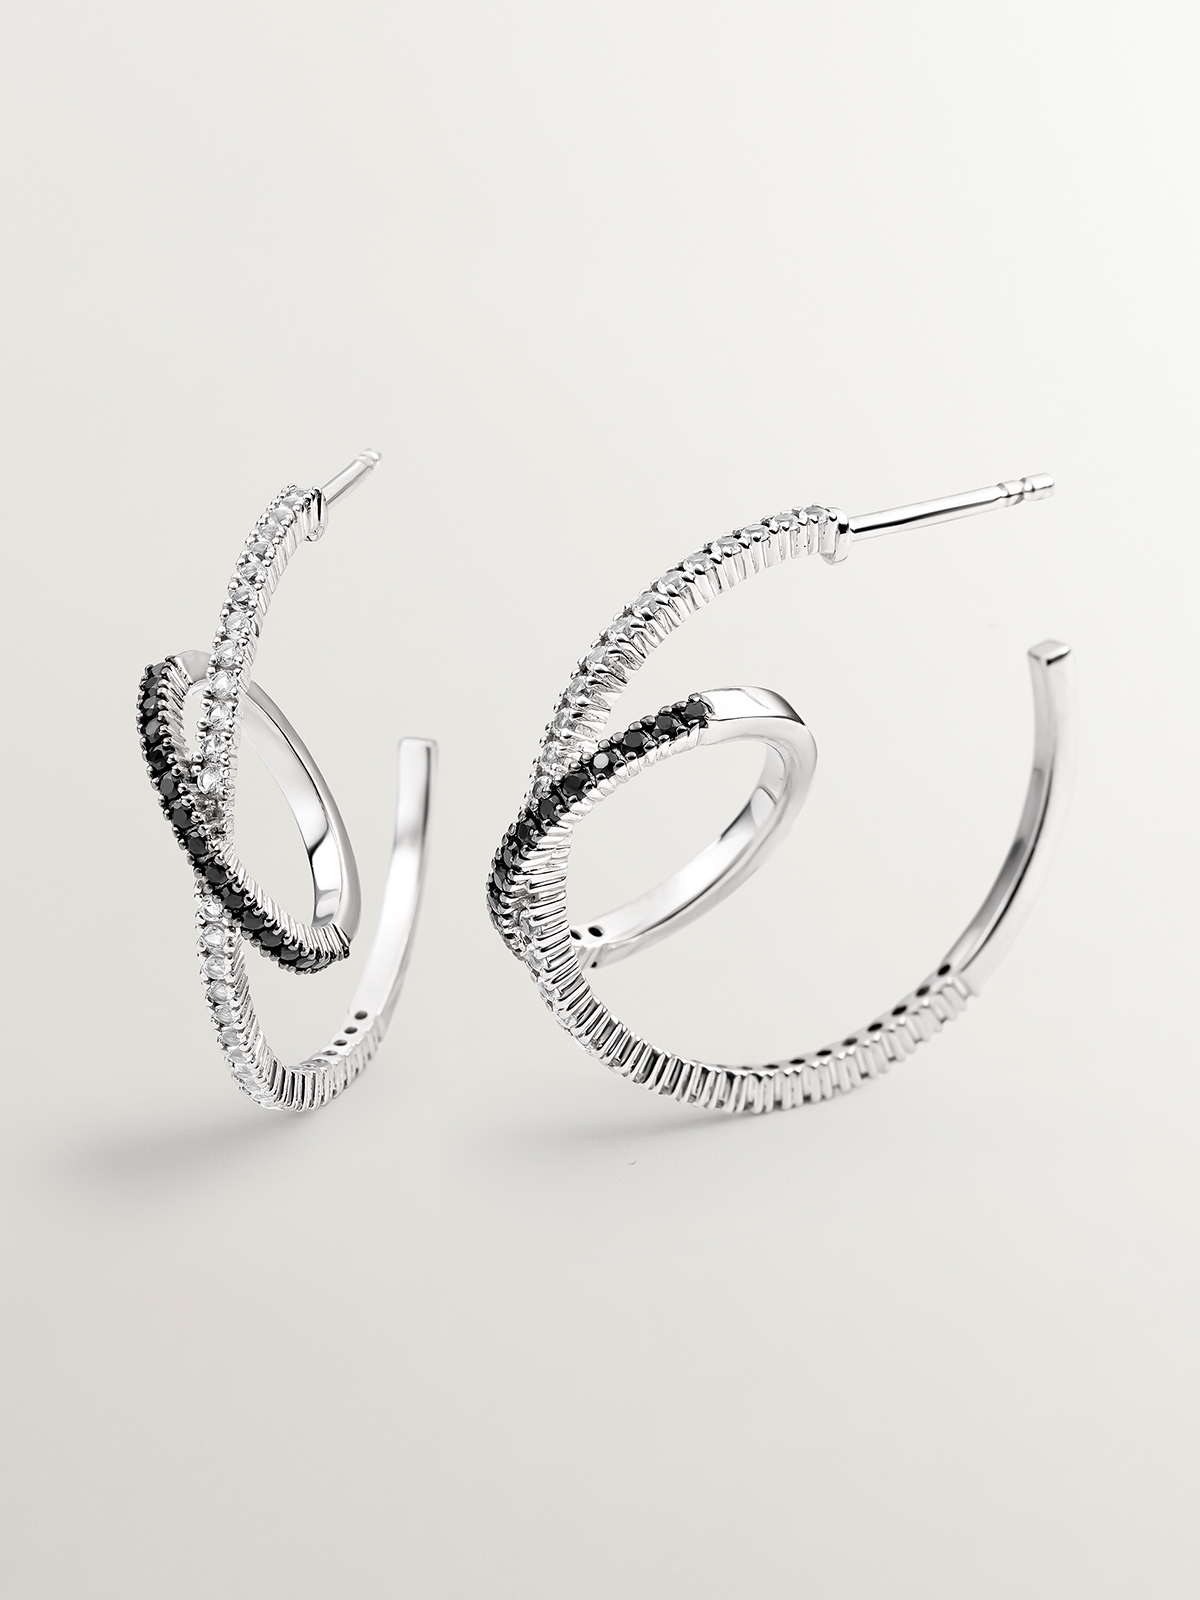 Double hoop earrings made of 925 silver with white topazes and black spinels.